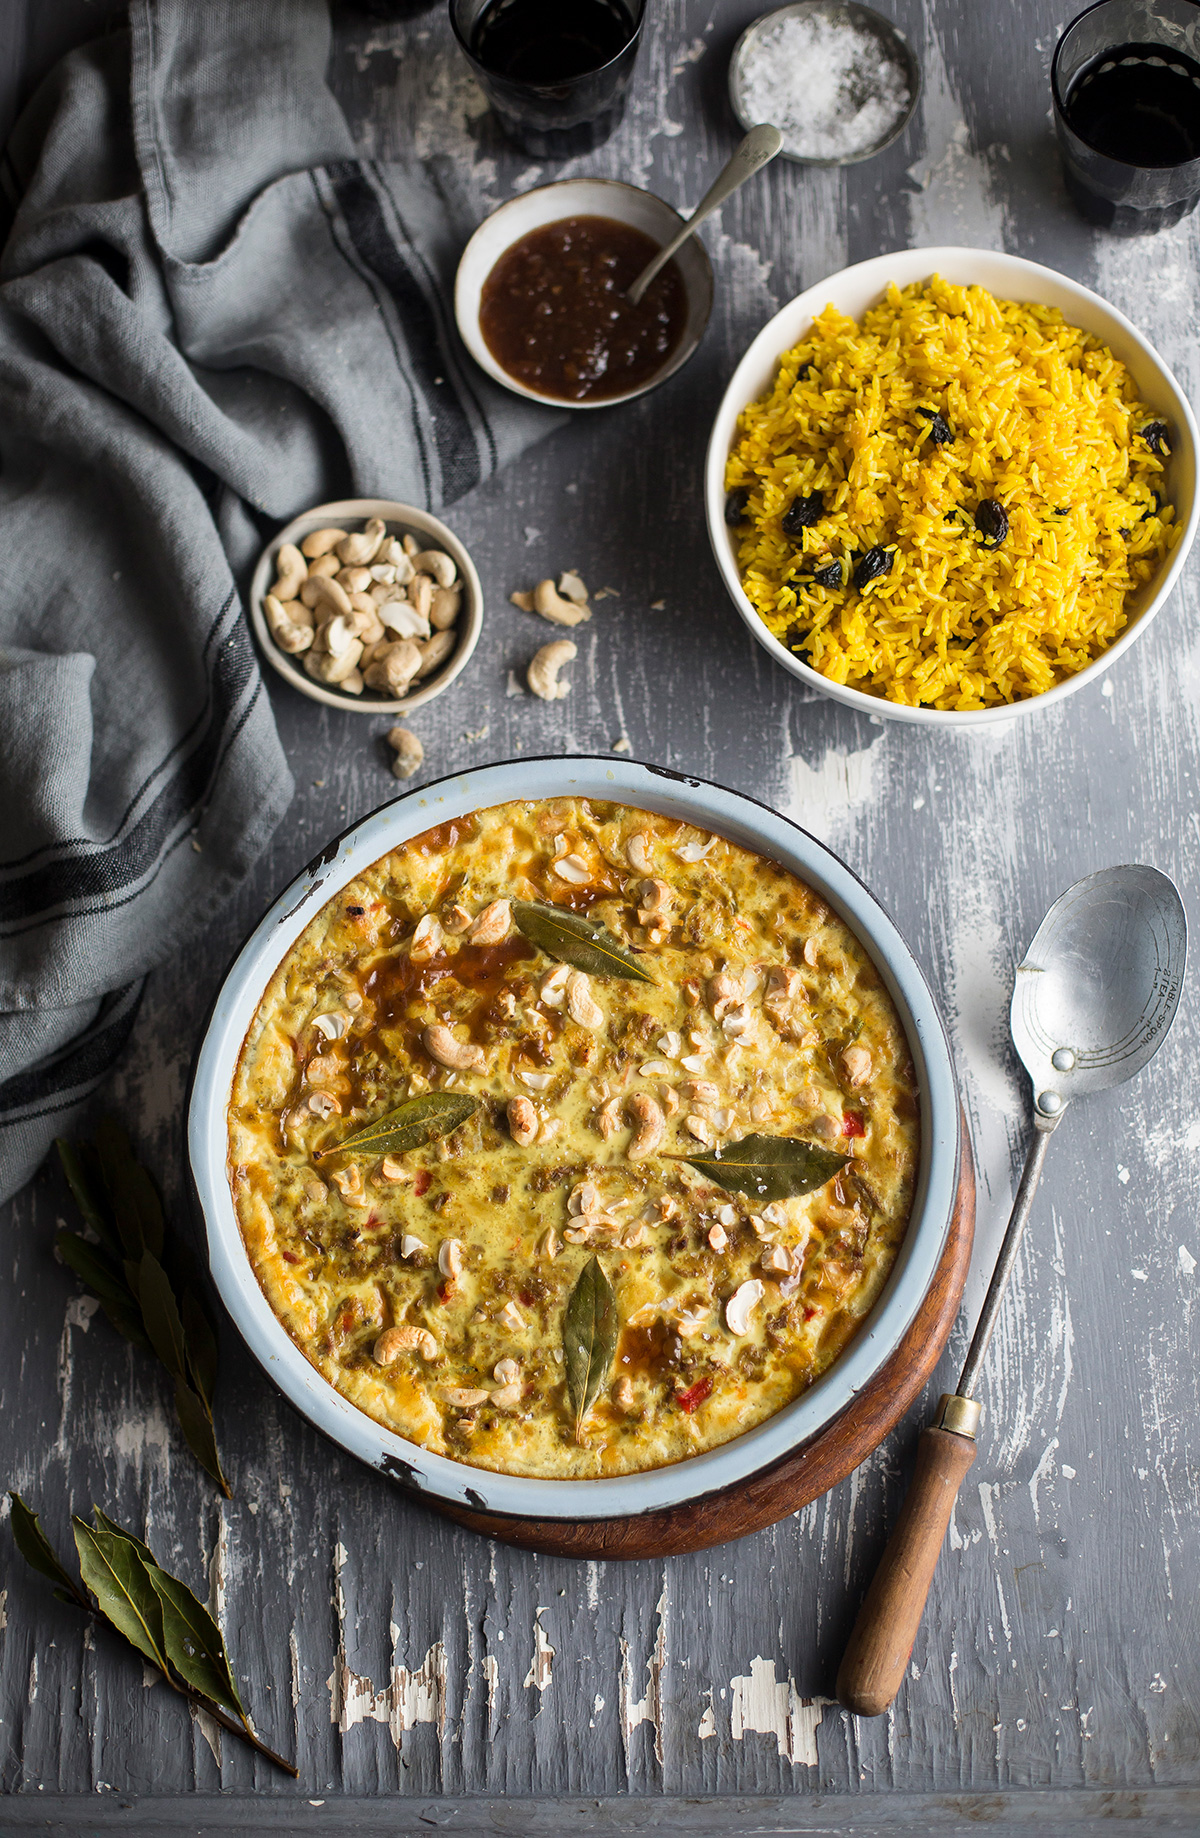 A traditional South African bobotie recipe with fragrant yellow rice